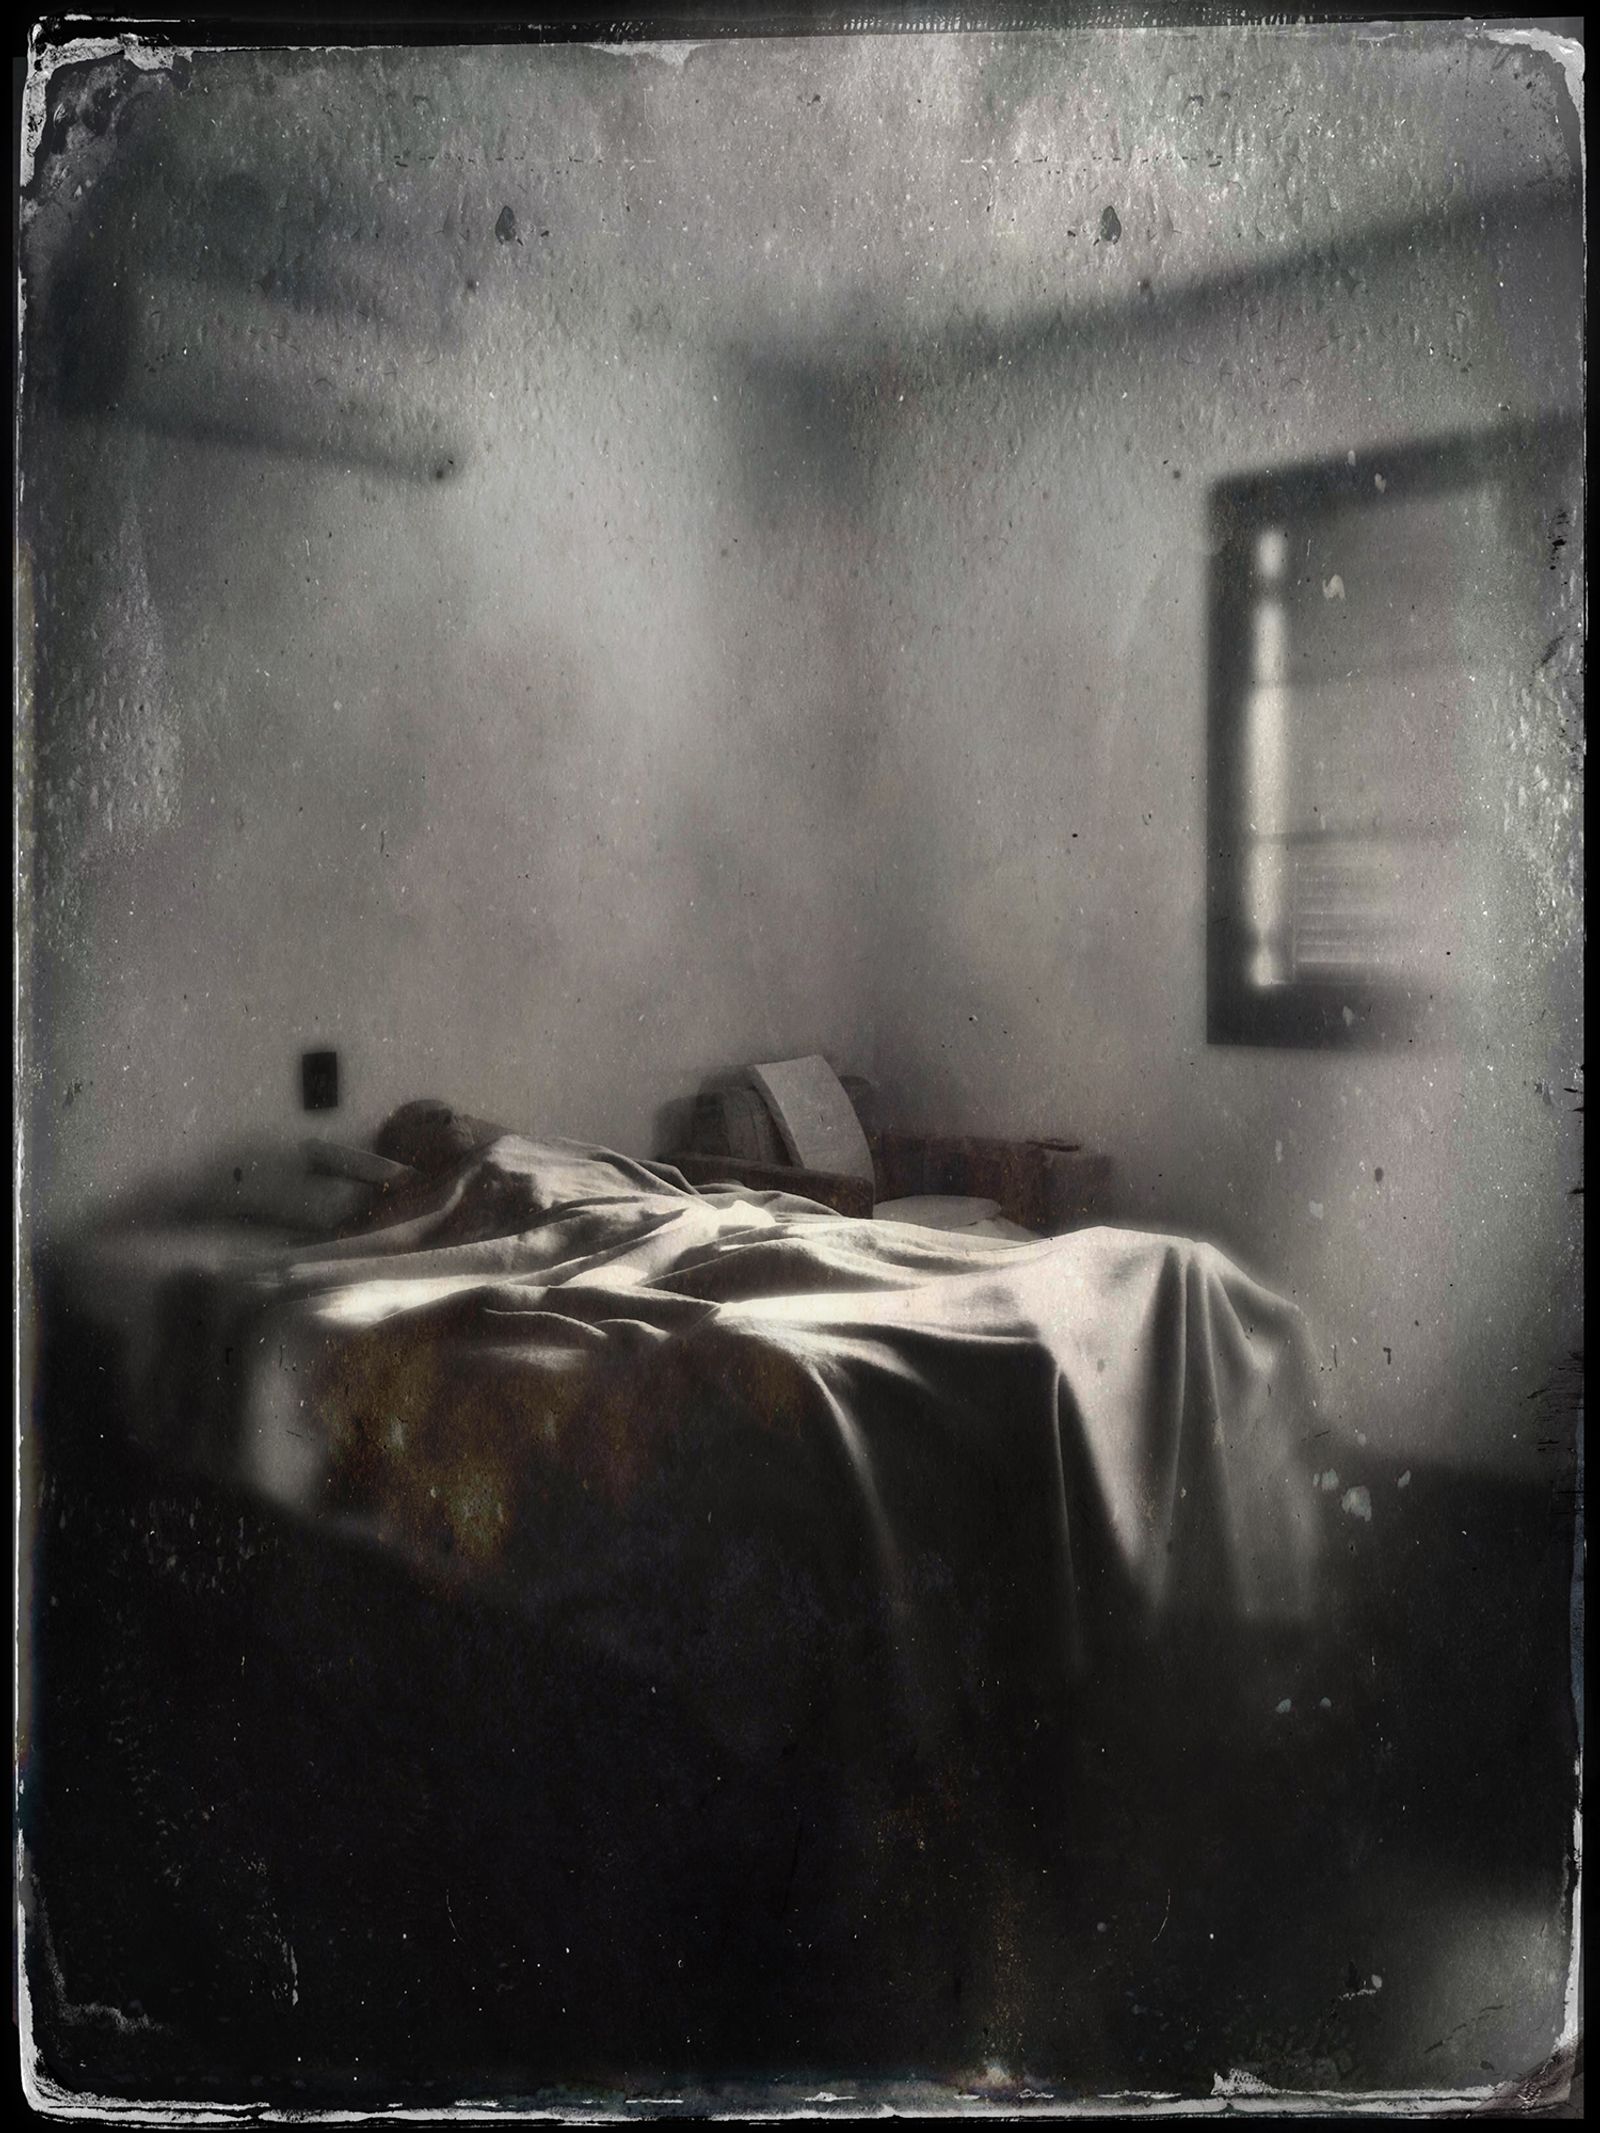 © Celante - Image from the Esmoressências (faded essences) photography project